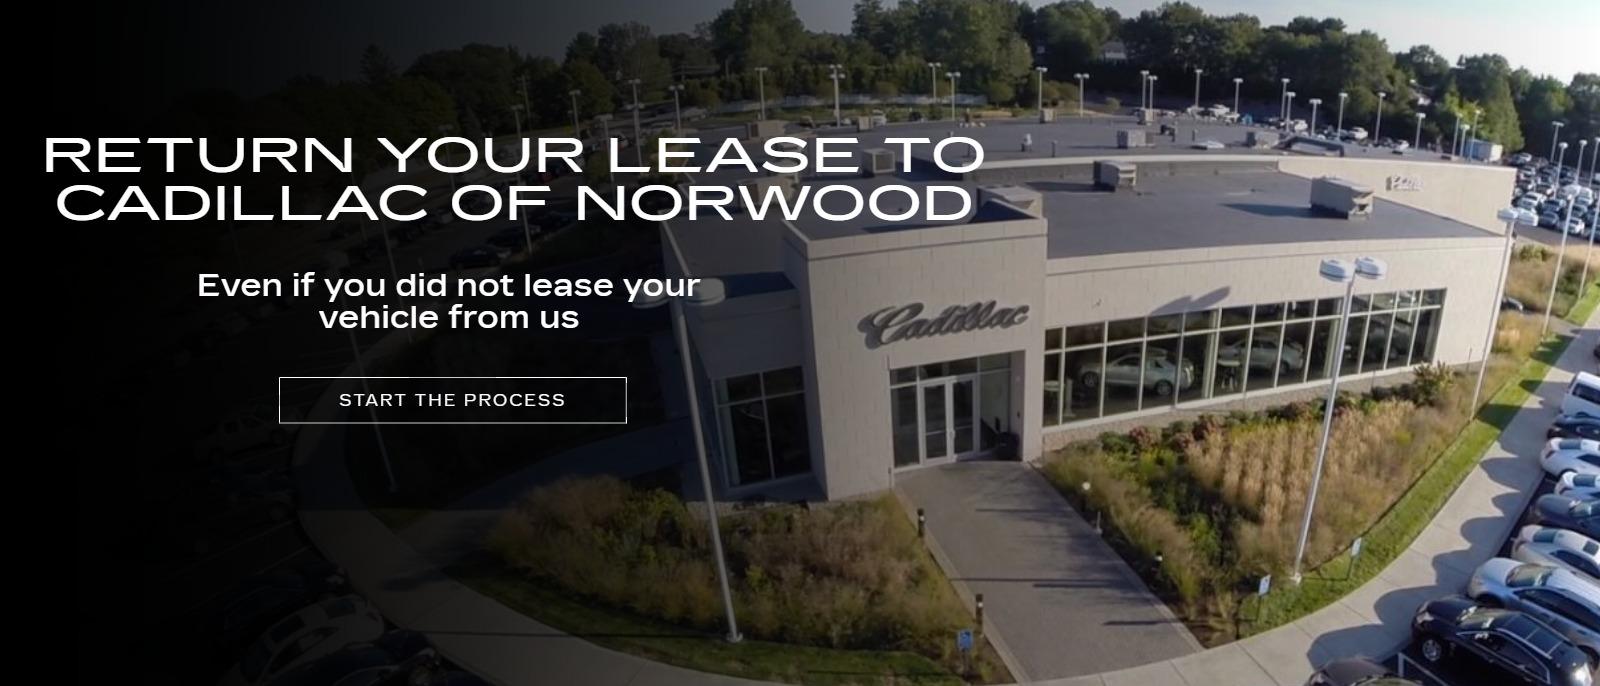 Return your leased vehicle to Cadillac of Norwood